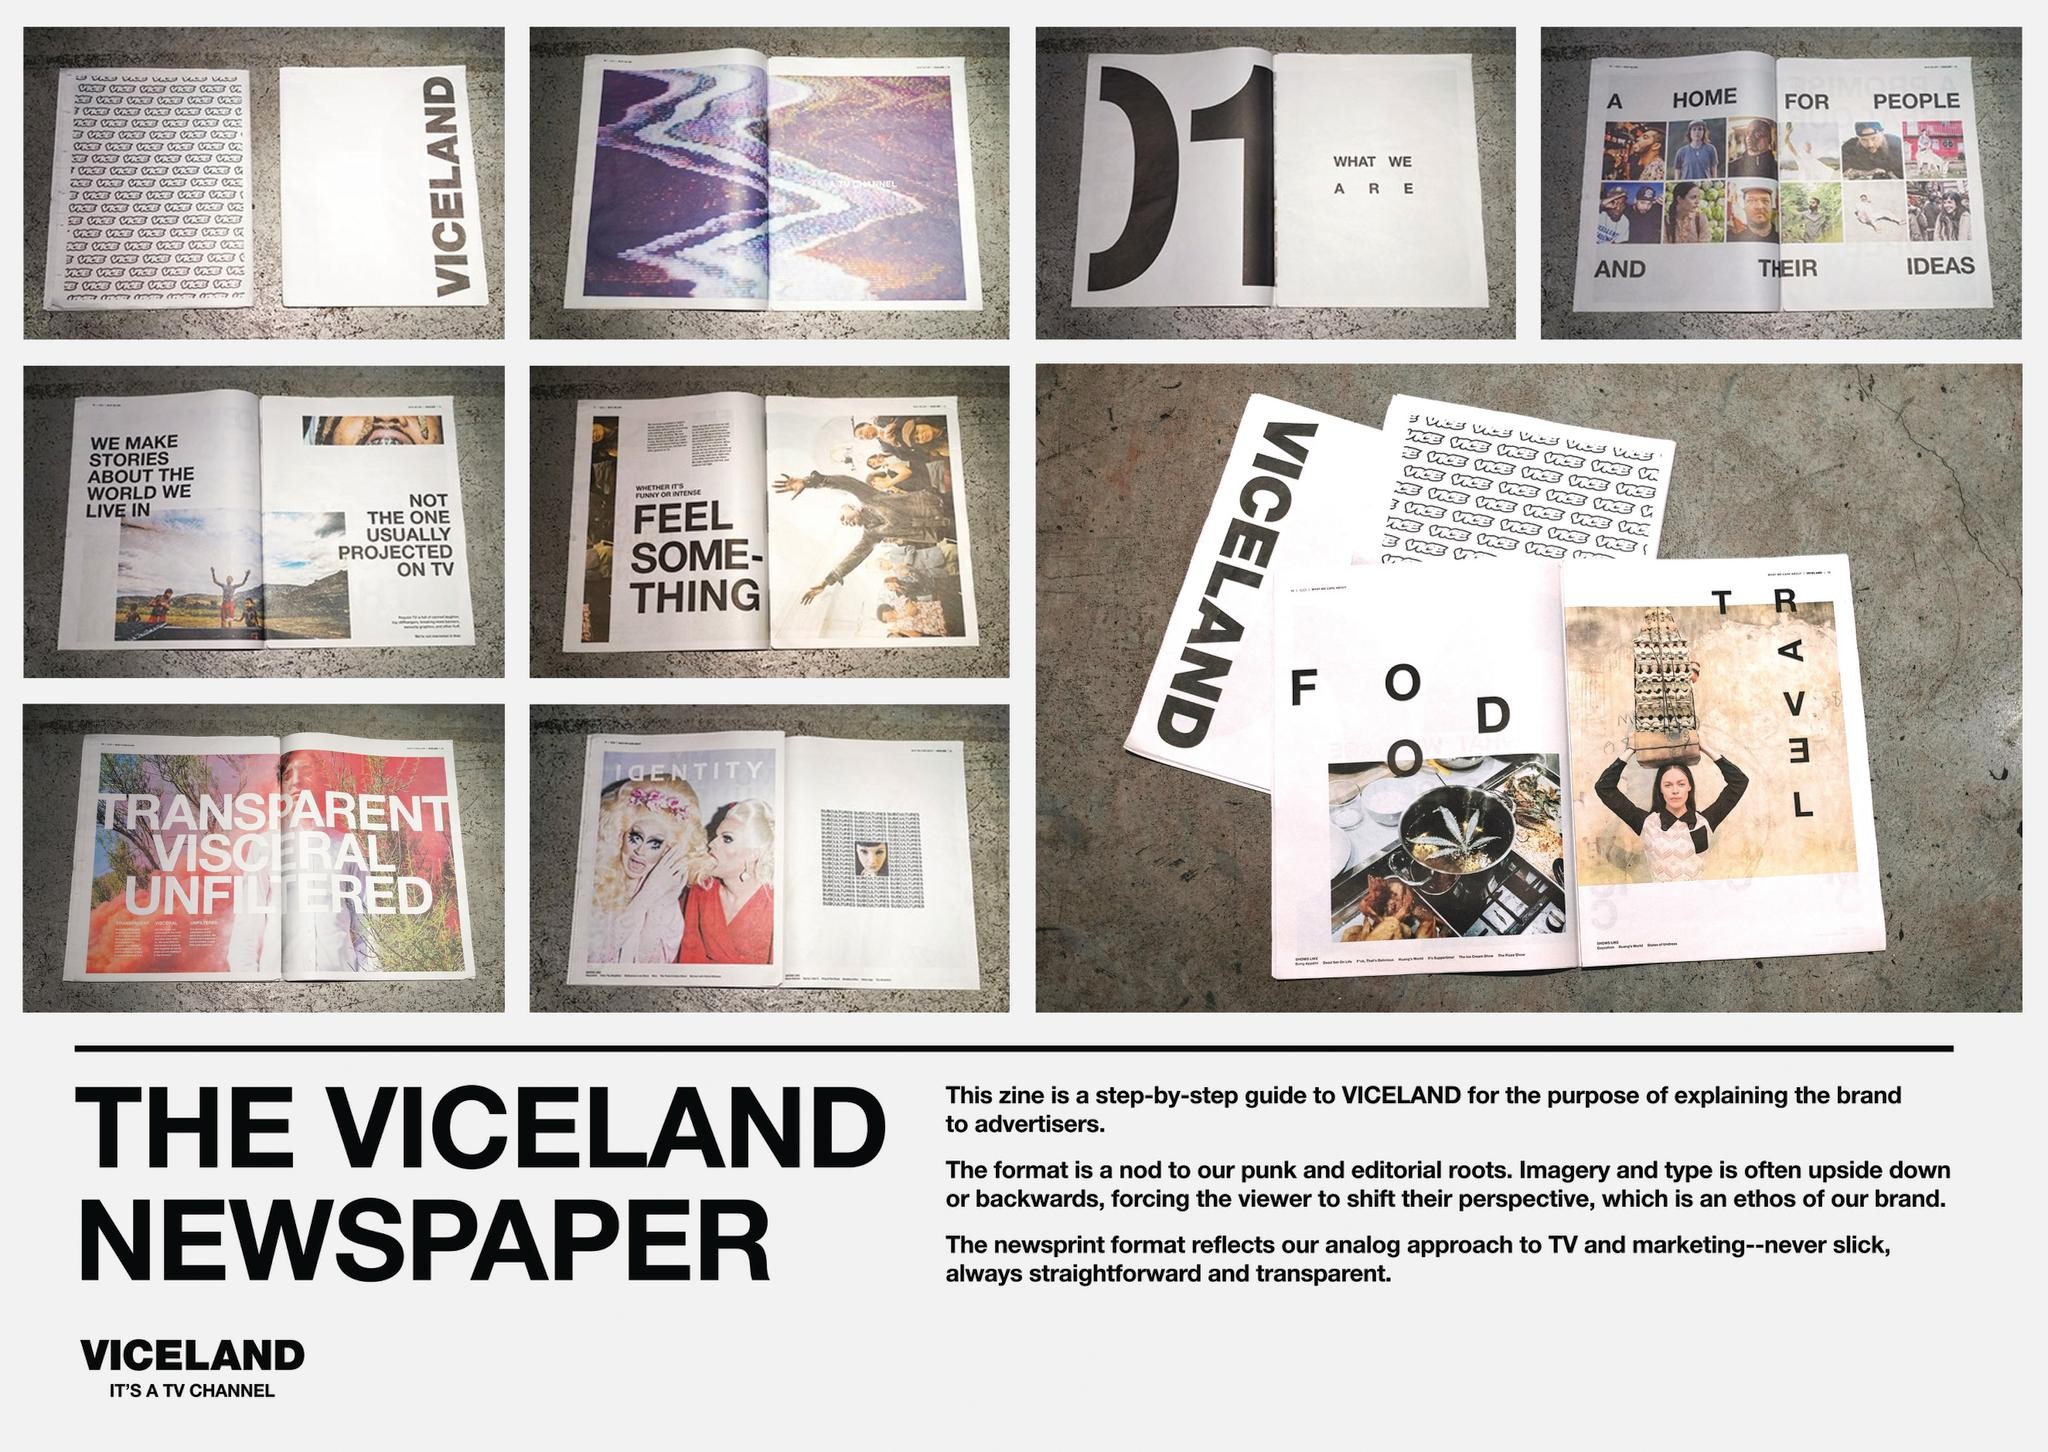 THE VICELAND NEWSPAPER